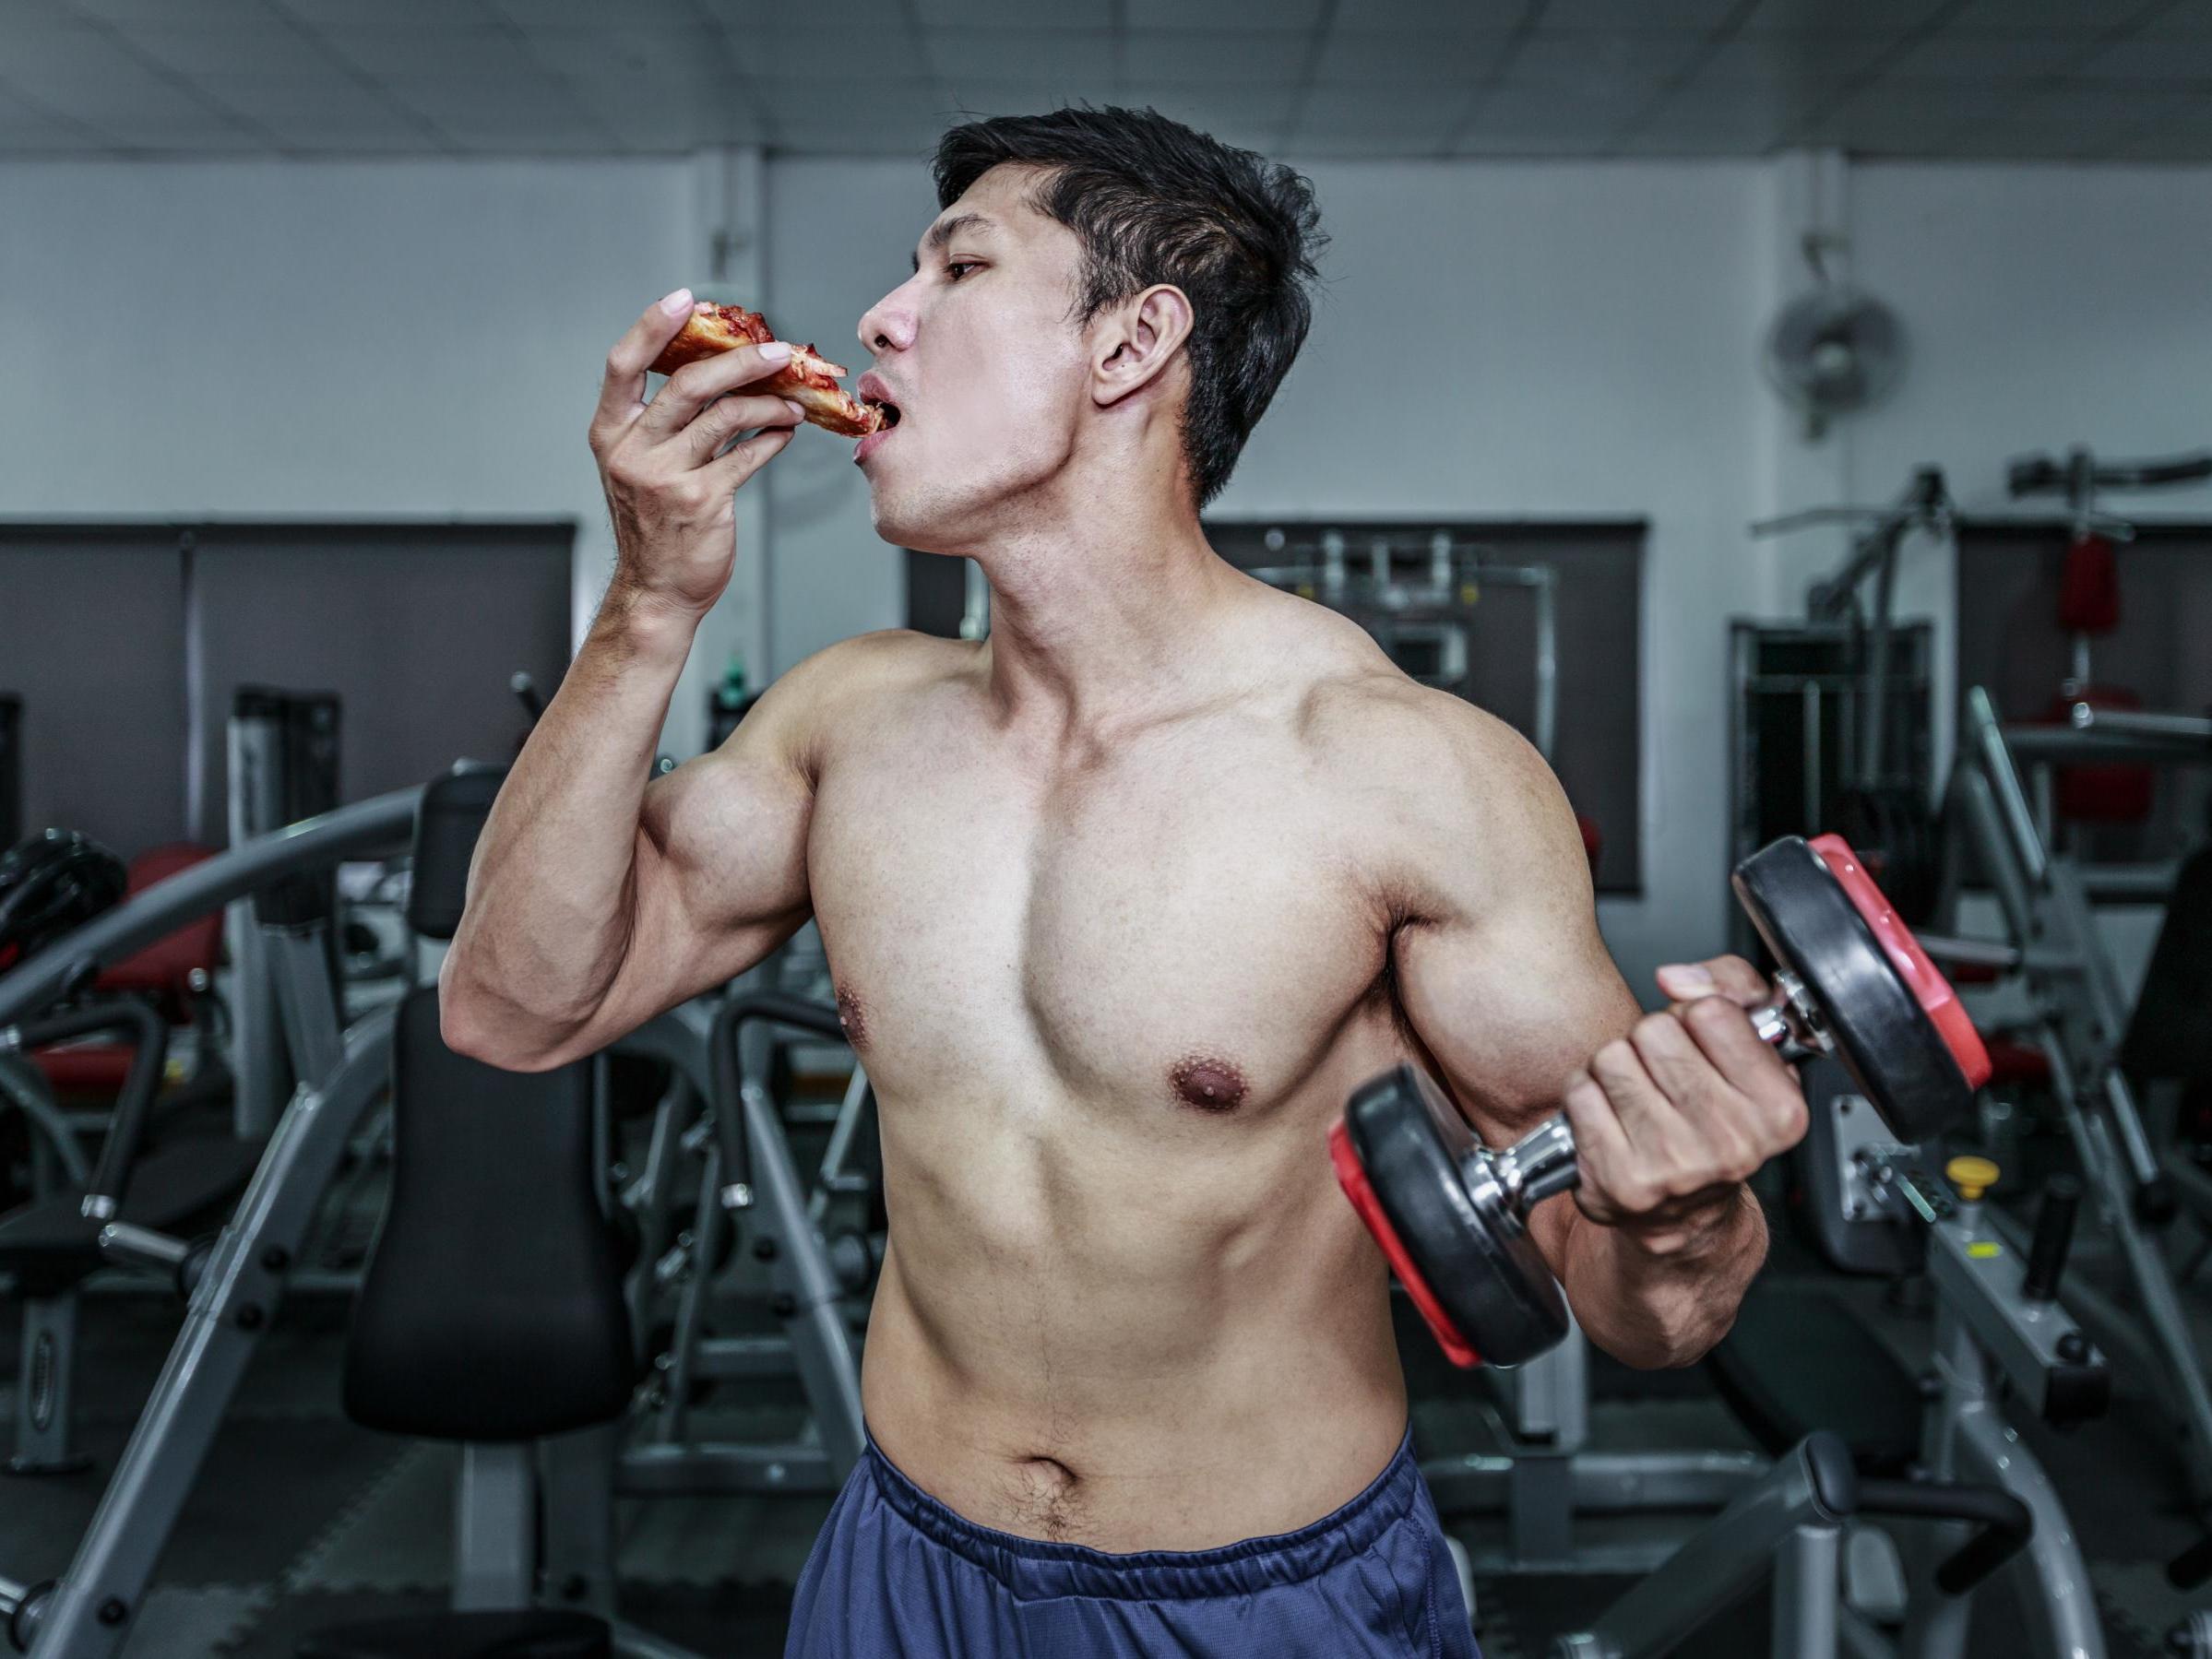 Young, fit men who eat a diet of pizza, chips and burgers have much lower sperm count, study finds The Independent The Independent pic